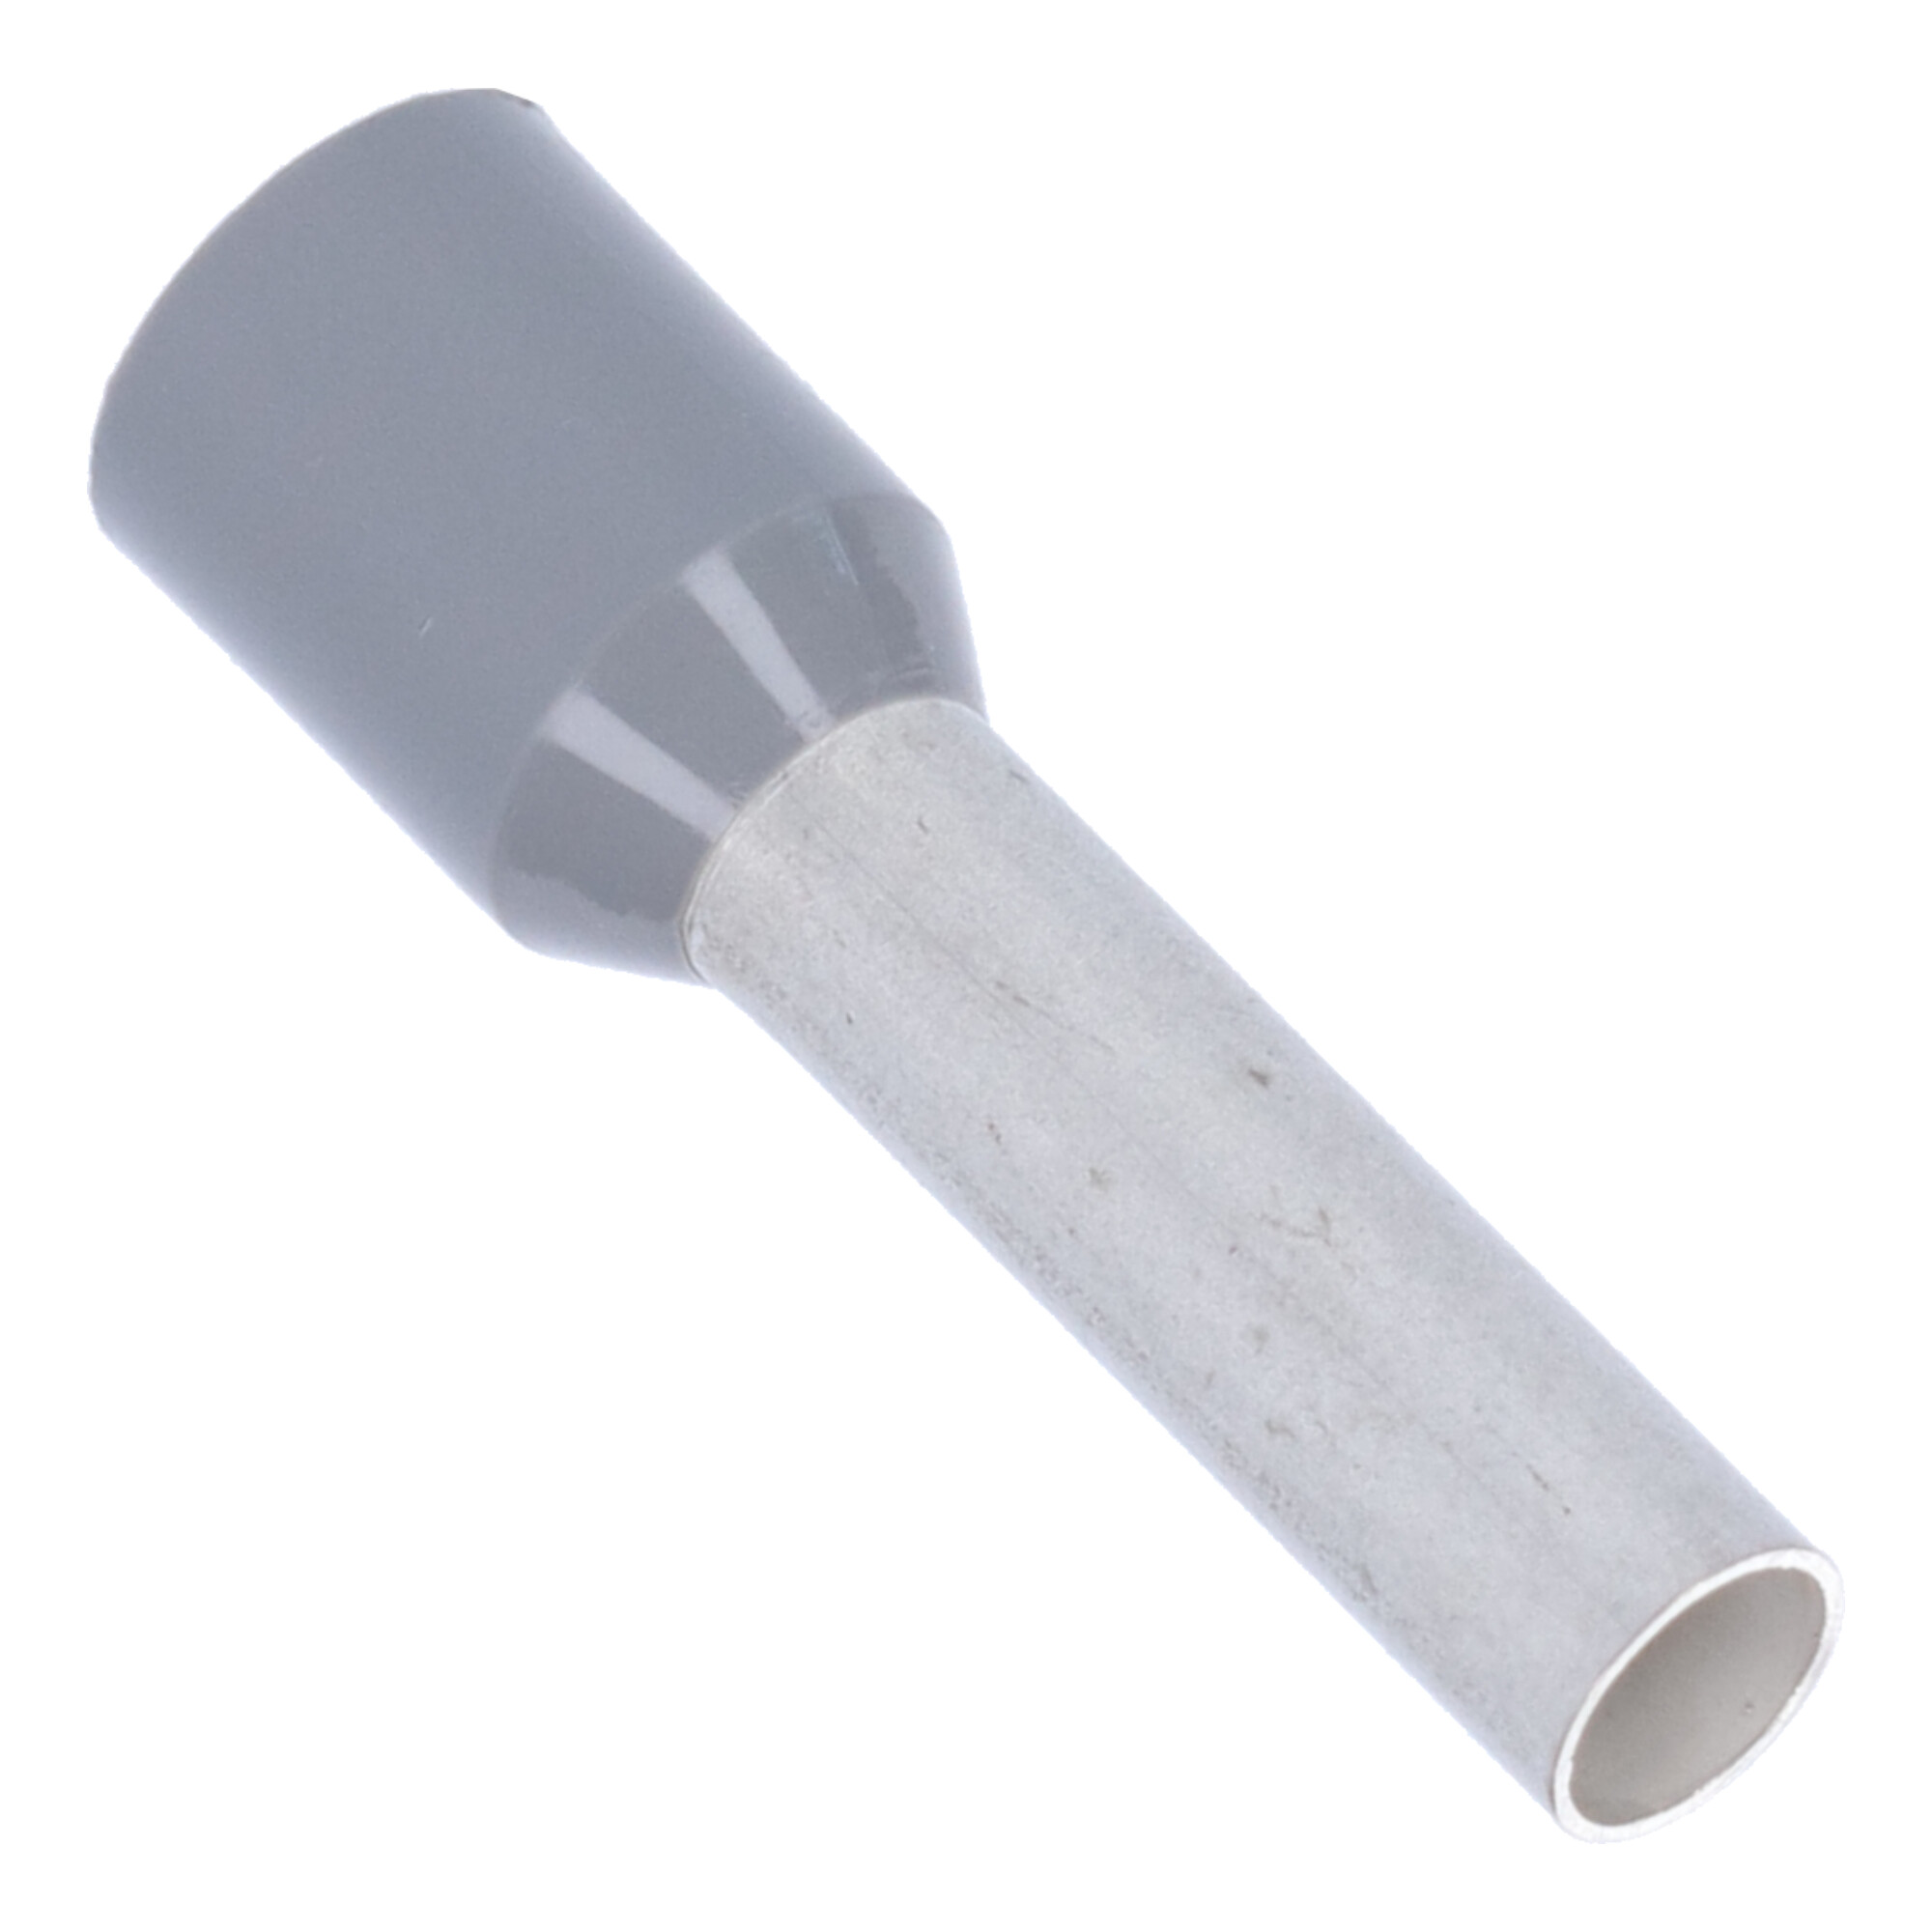 15-00775 Insulated wire end sleeve